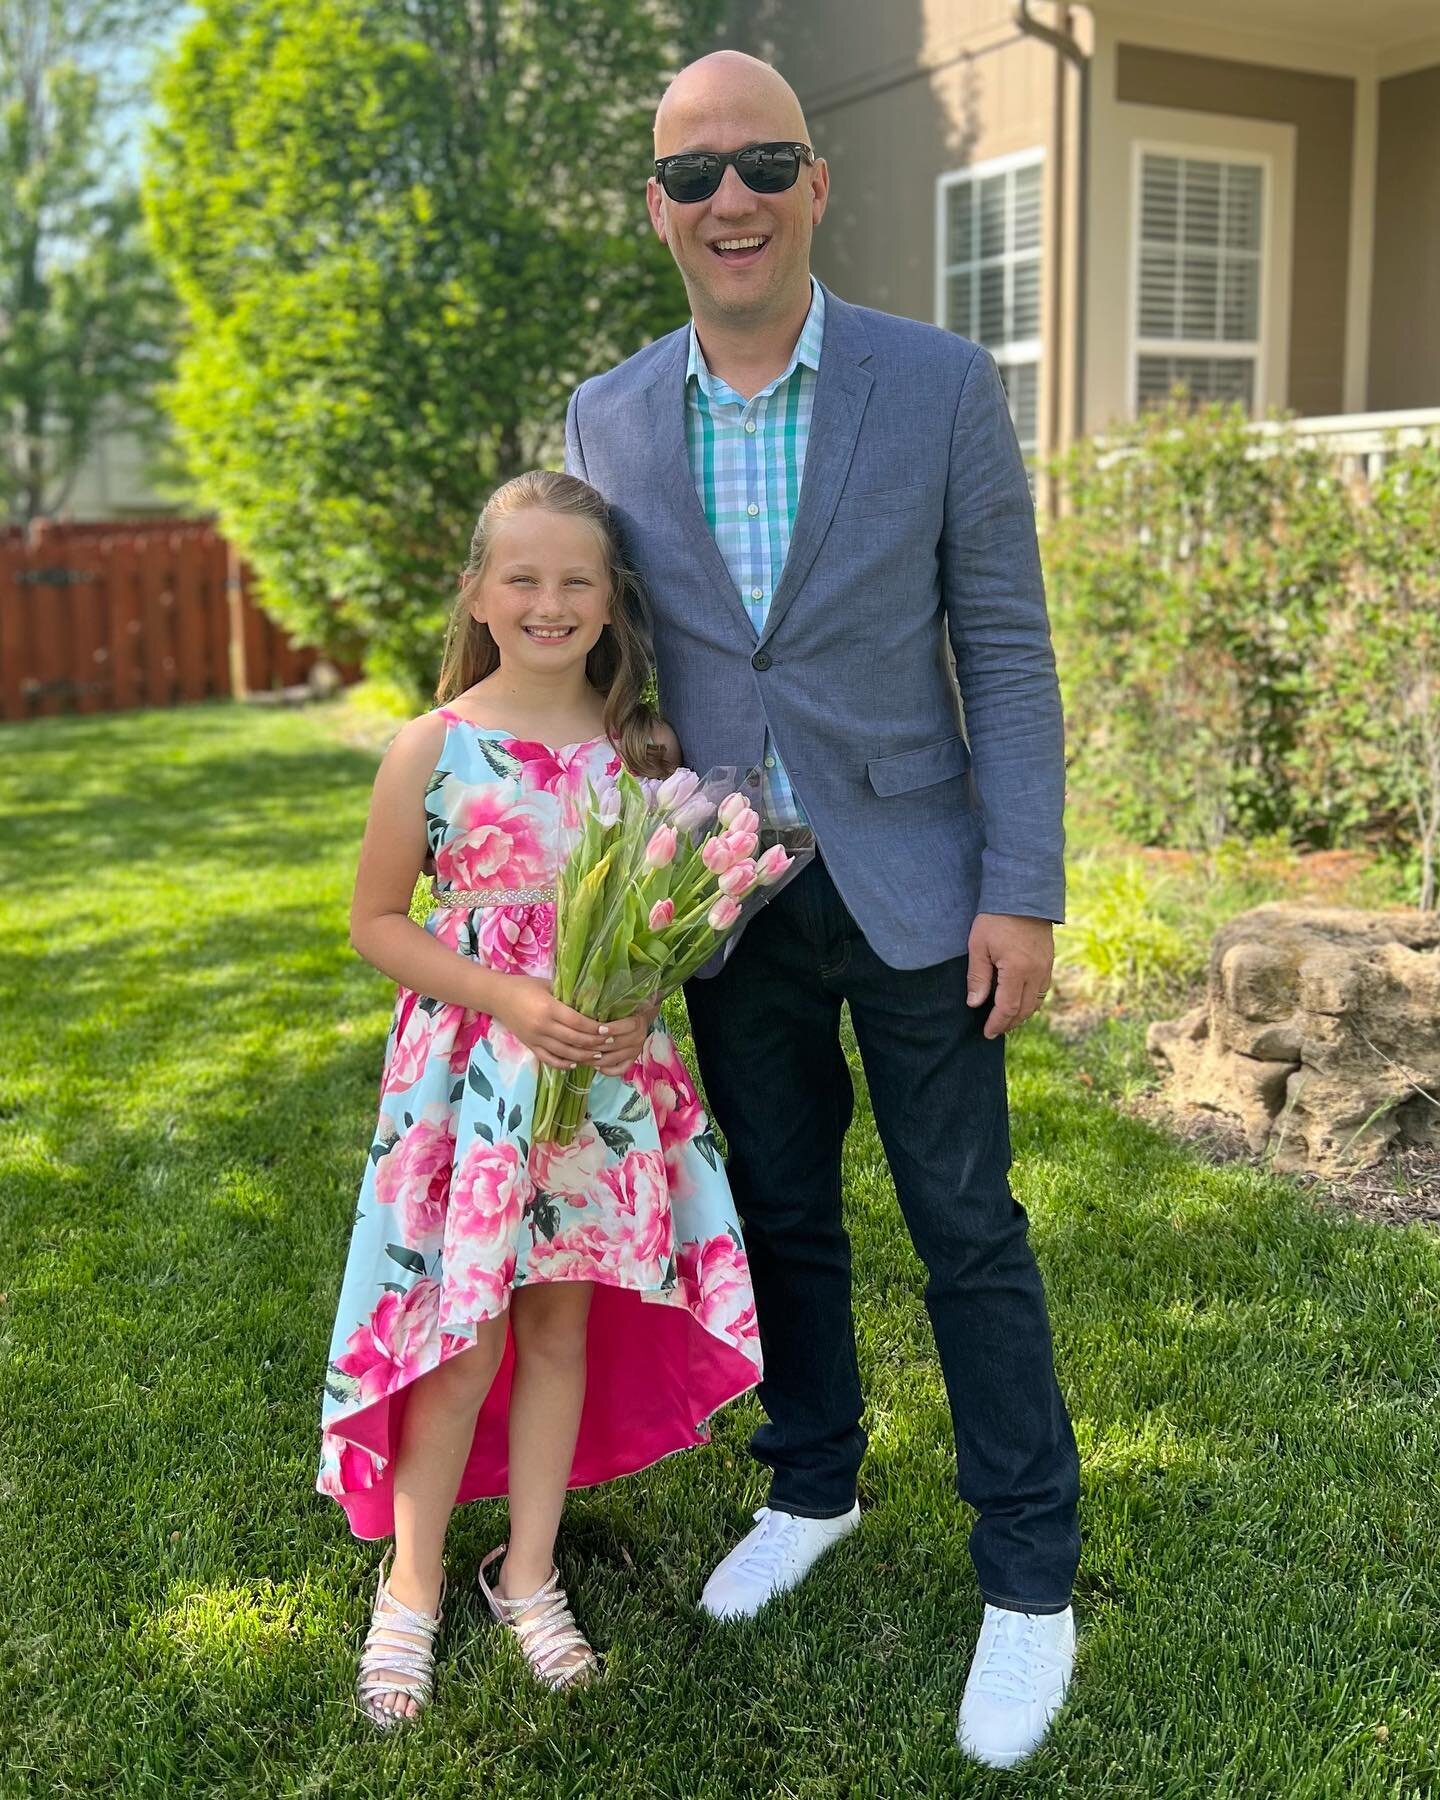 ✨Daddy Daughter Dance✨The bond these two have is so special! Date at Gracie&rsquo;s favorite fancy restaurant and then off to the dance! 

Also, when you can&rsquo;t find an overlay patch for her #dexcom that matches her dress - Mom custom makes one 